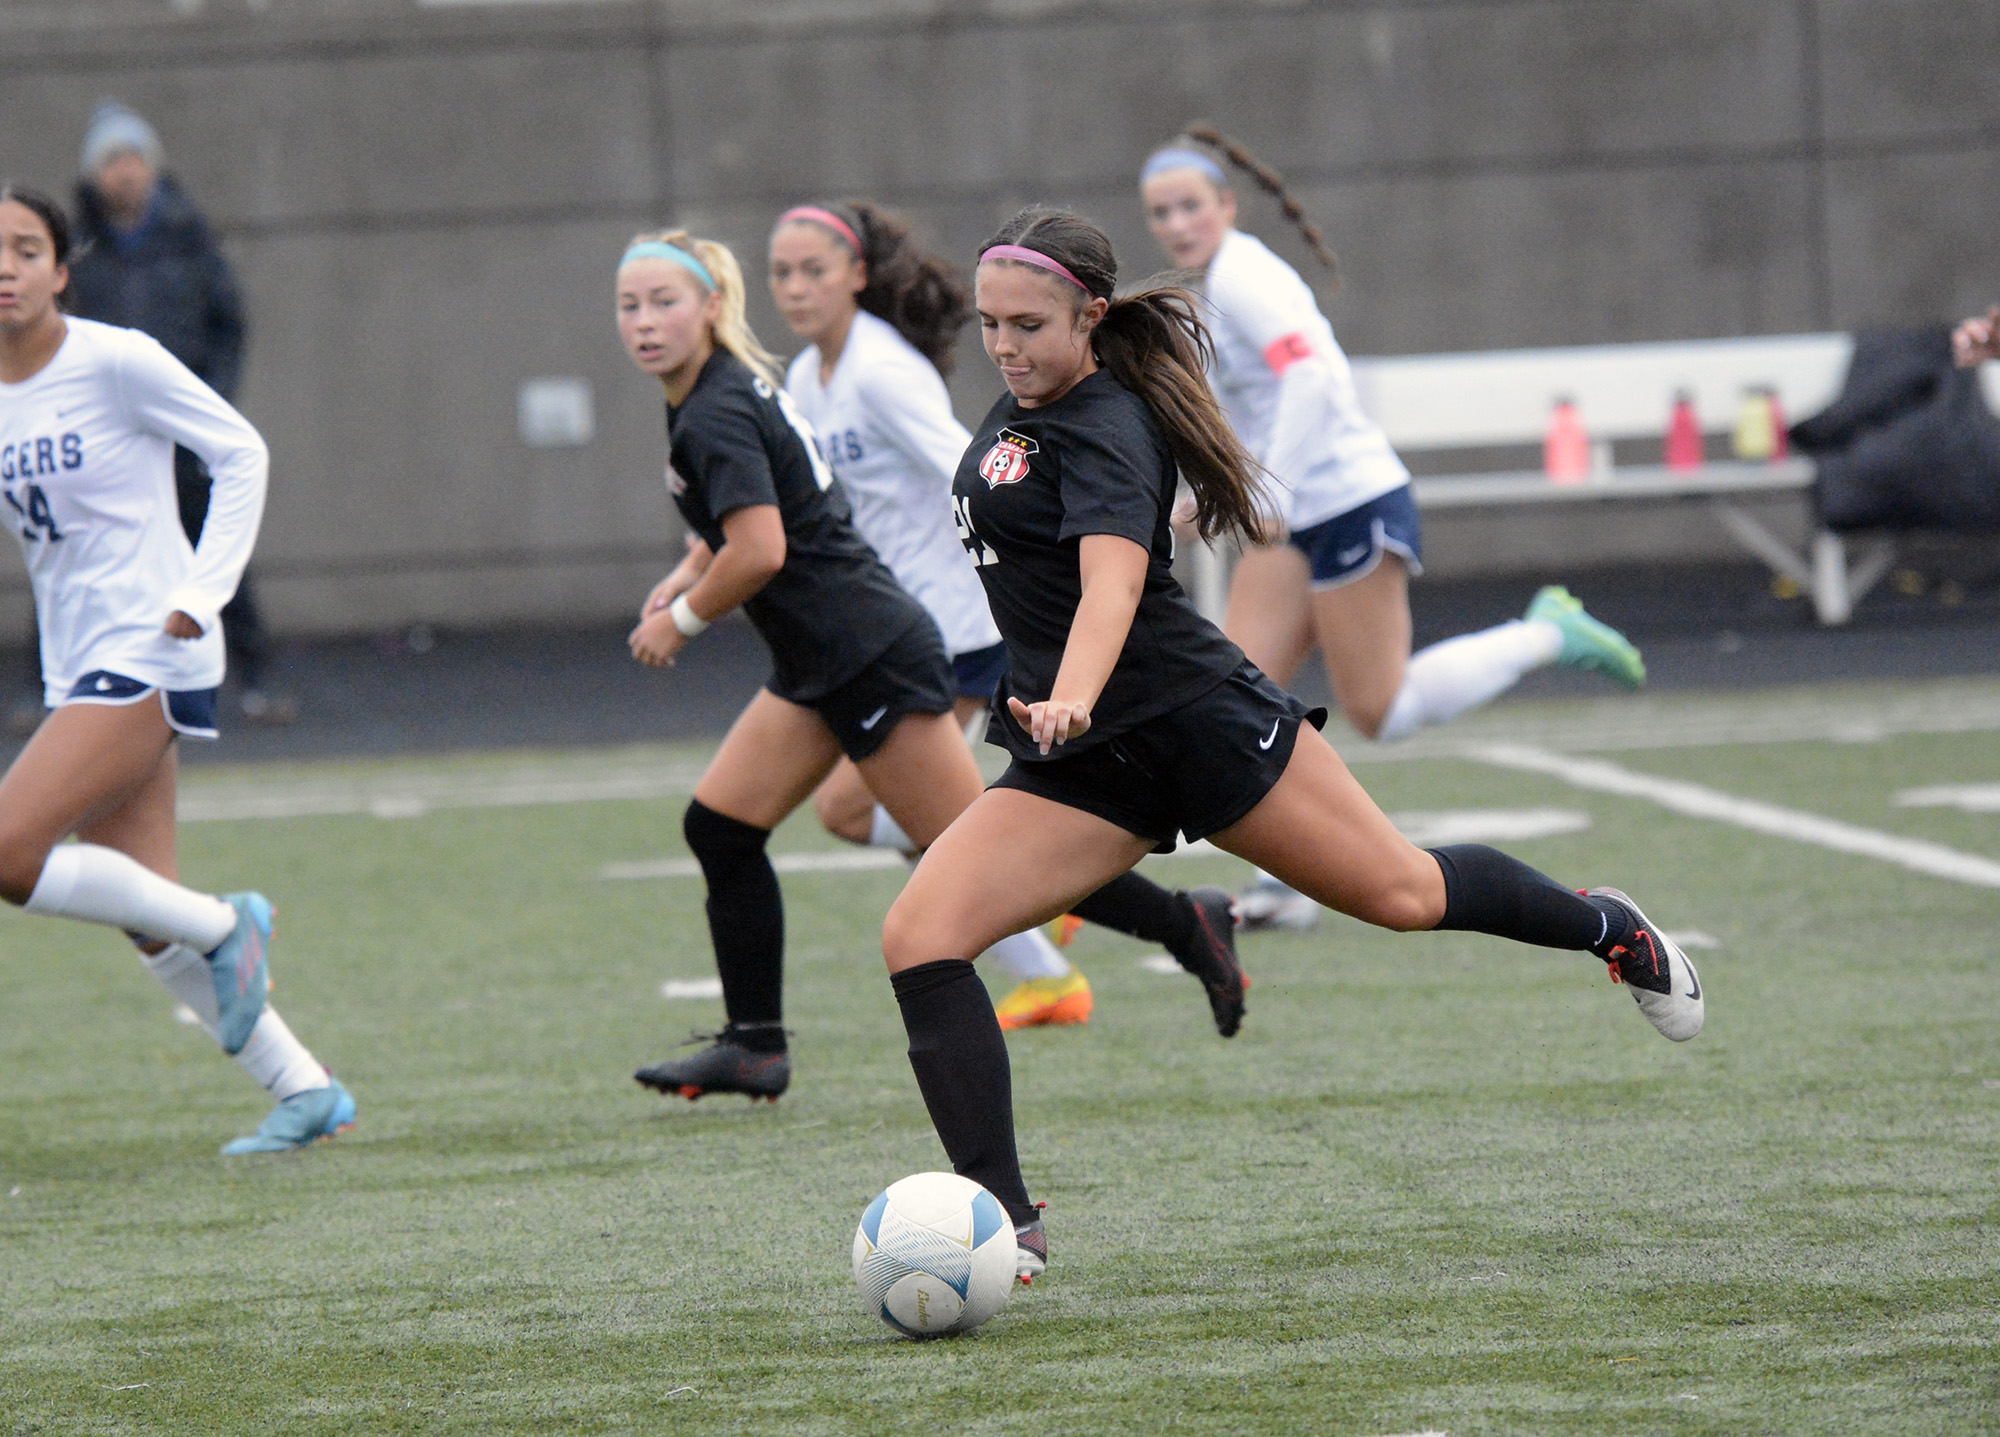 Camas senior Bella Burns strikes the ball during Camas' 3-0 win over Rogers-Puyallup in a 4A bi-district soccer playoff match at Doc Harris Stadium on Saturday, Oct. 29, 2022.